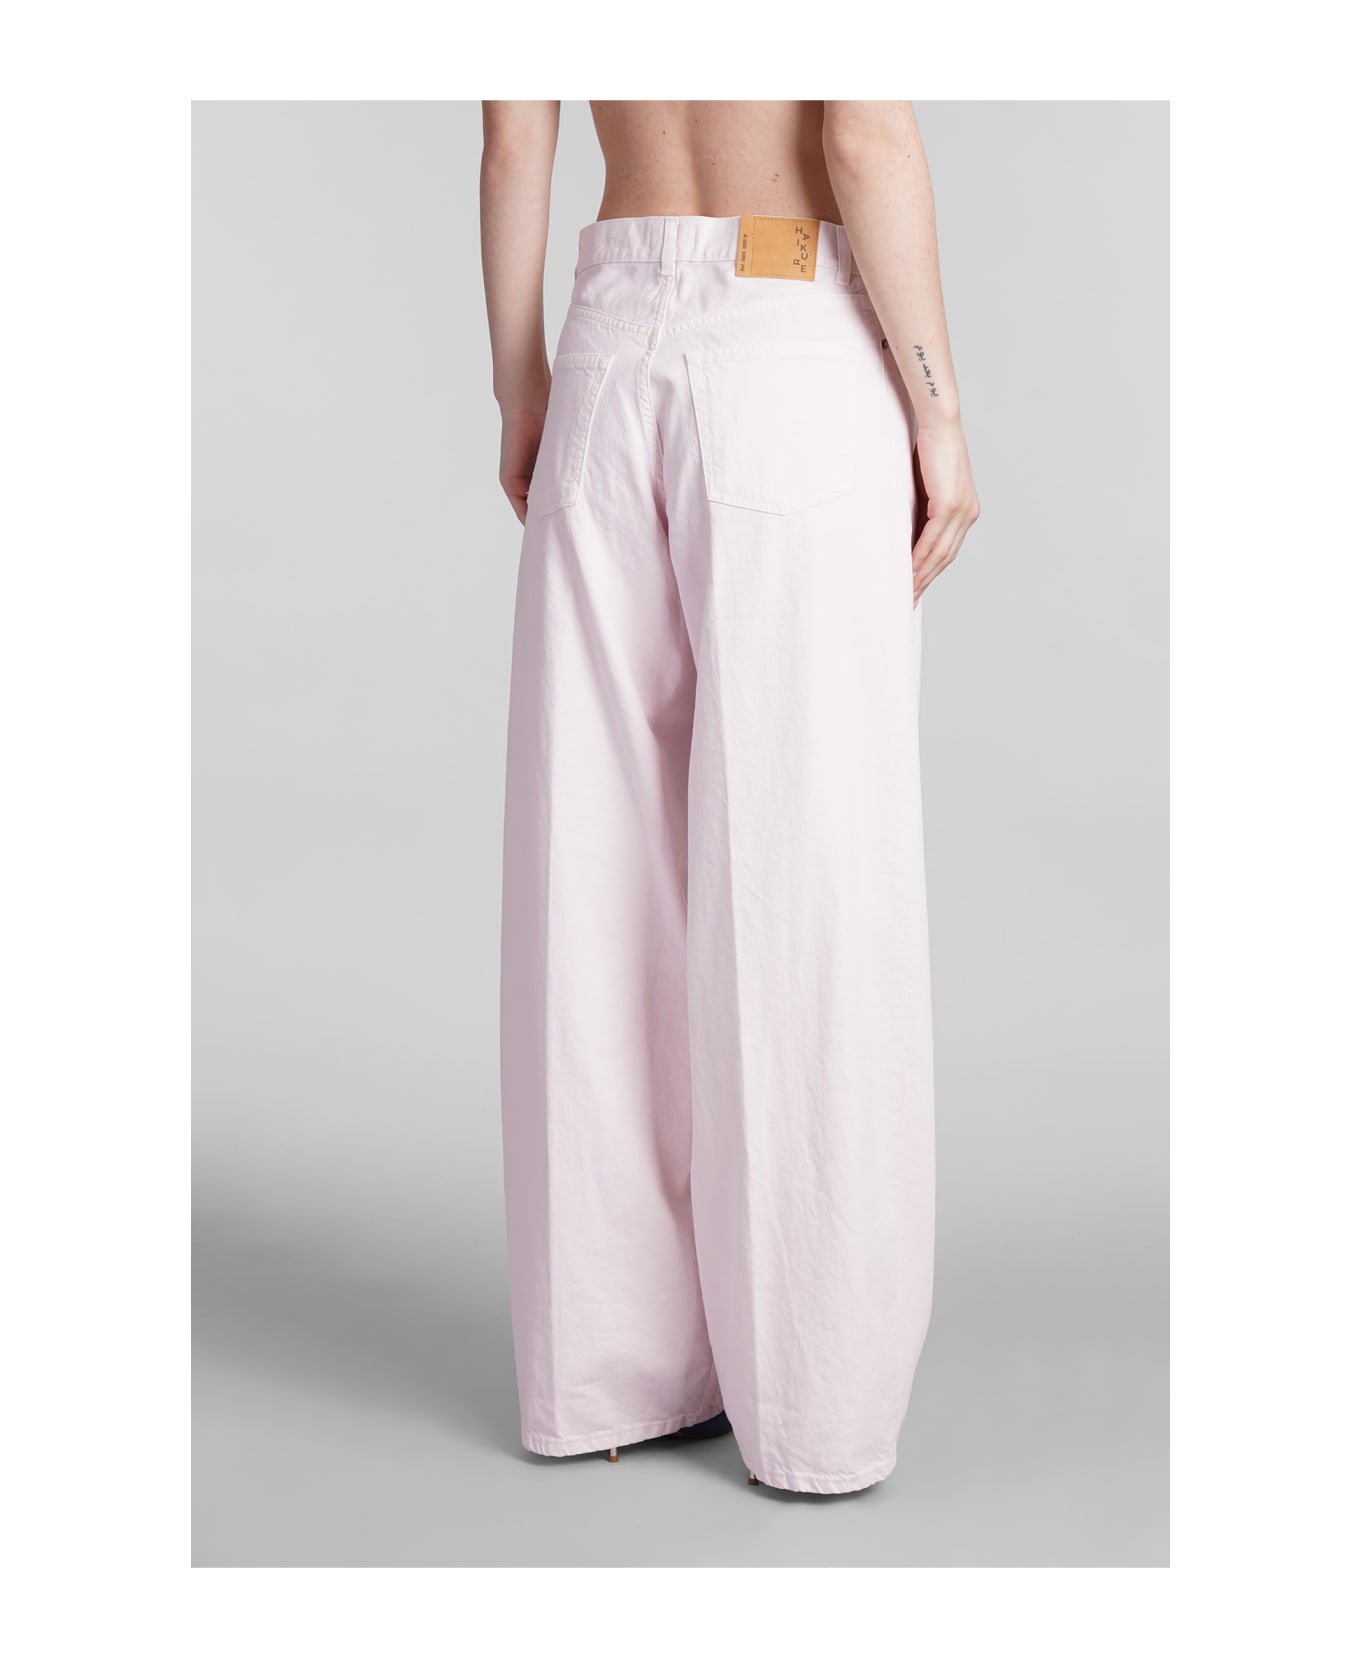 Haikure Bethany Jeans In Rose-pink Cotton - rose-pink